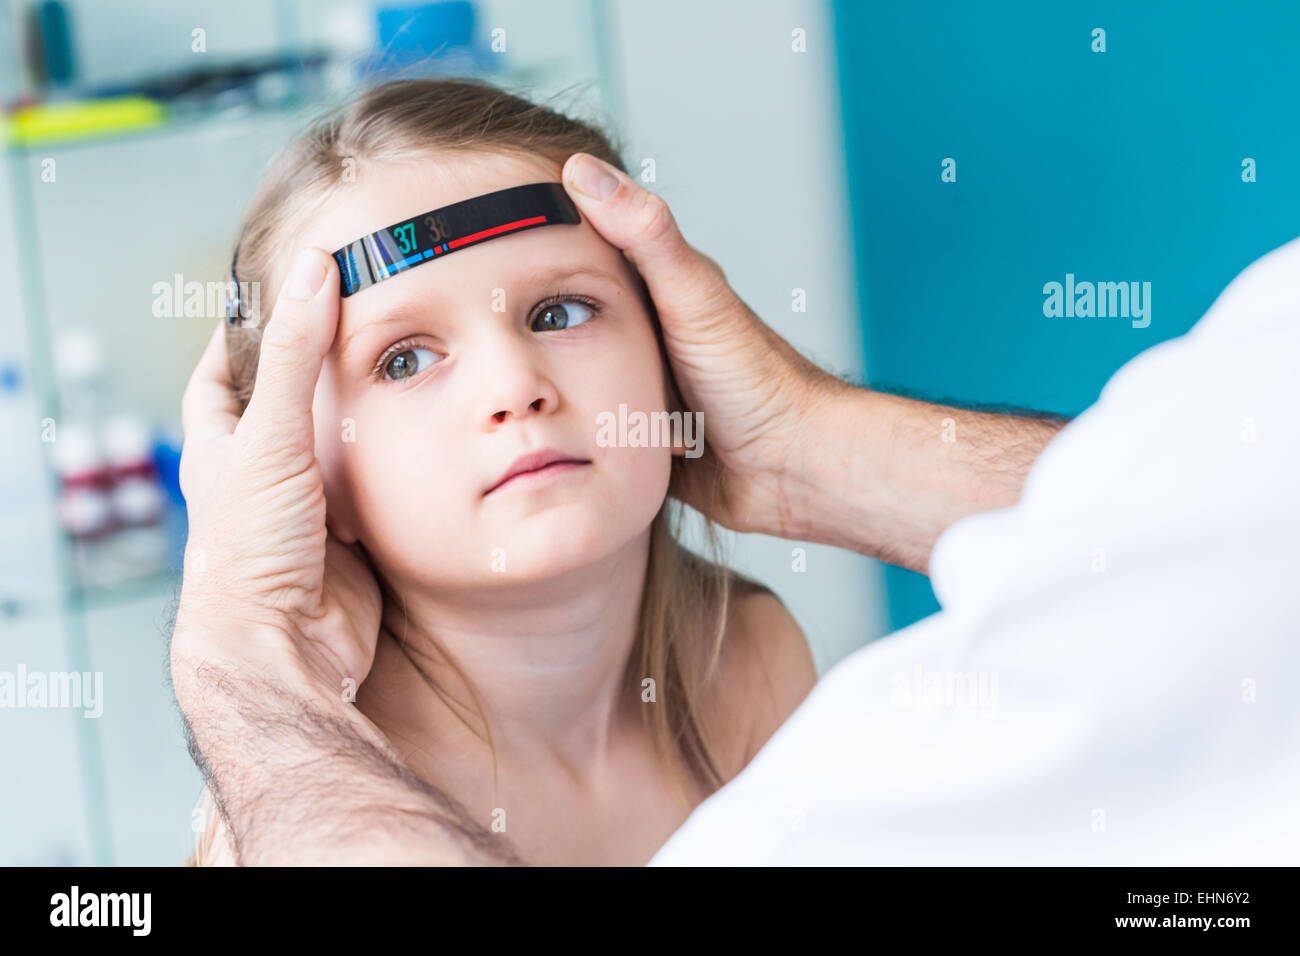 Measuring body temperature, using a strip thermometer. Stock Photo